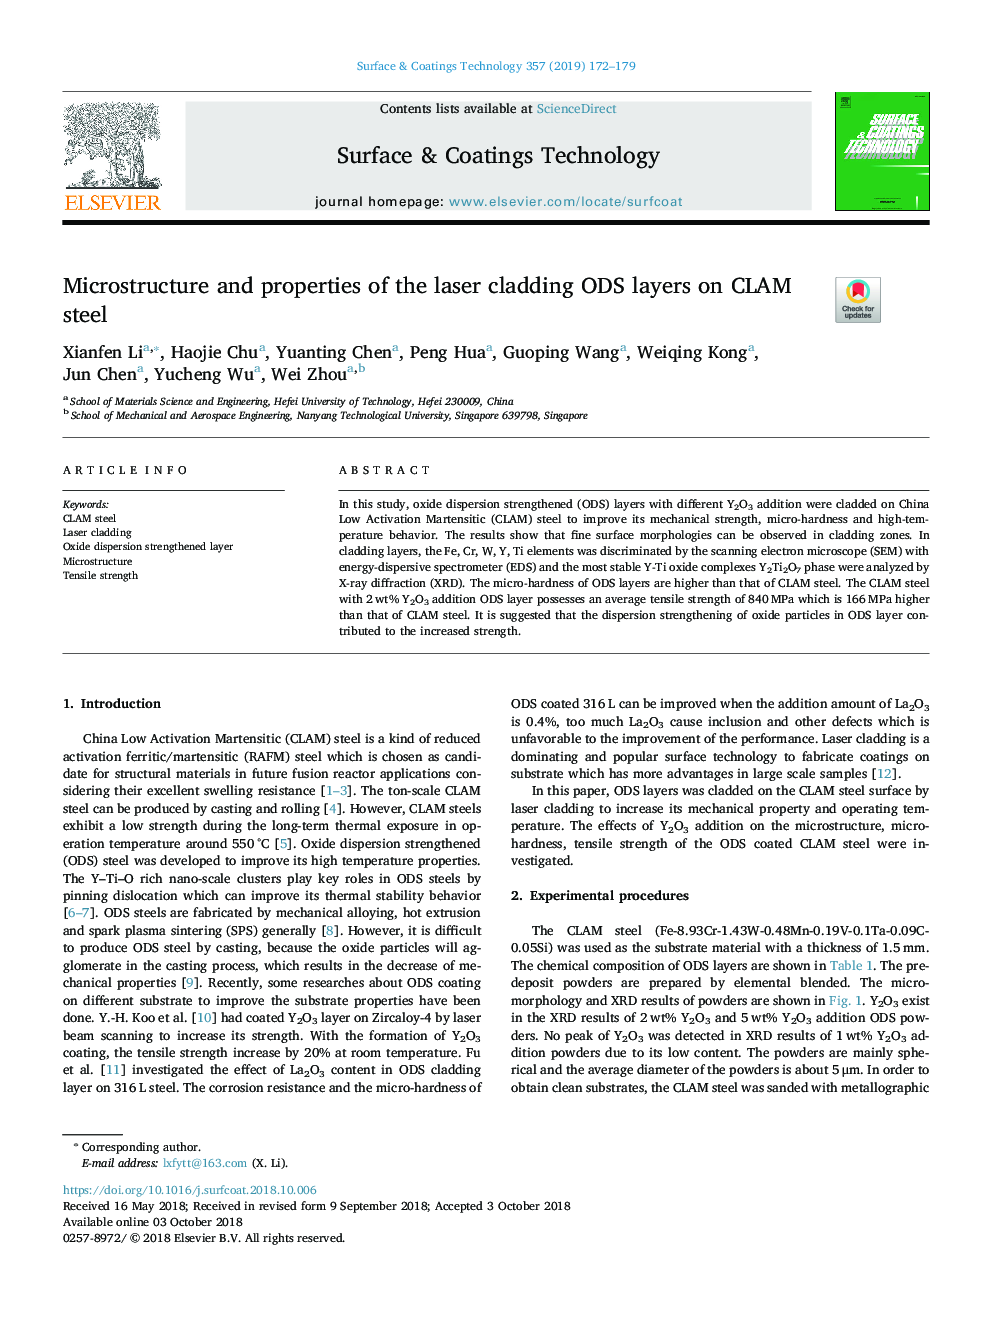 Microstructure and properties of the laser cladding ODS layers on CLAM steel